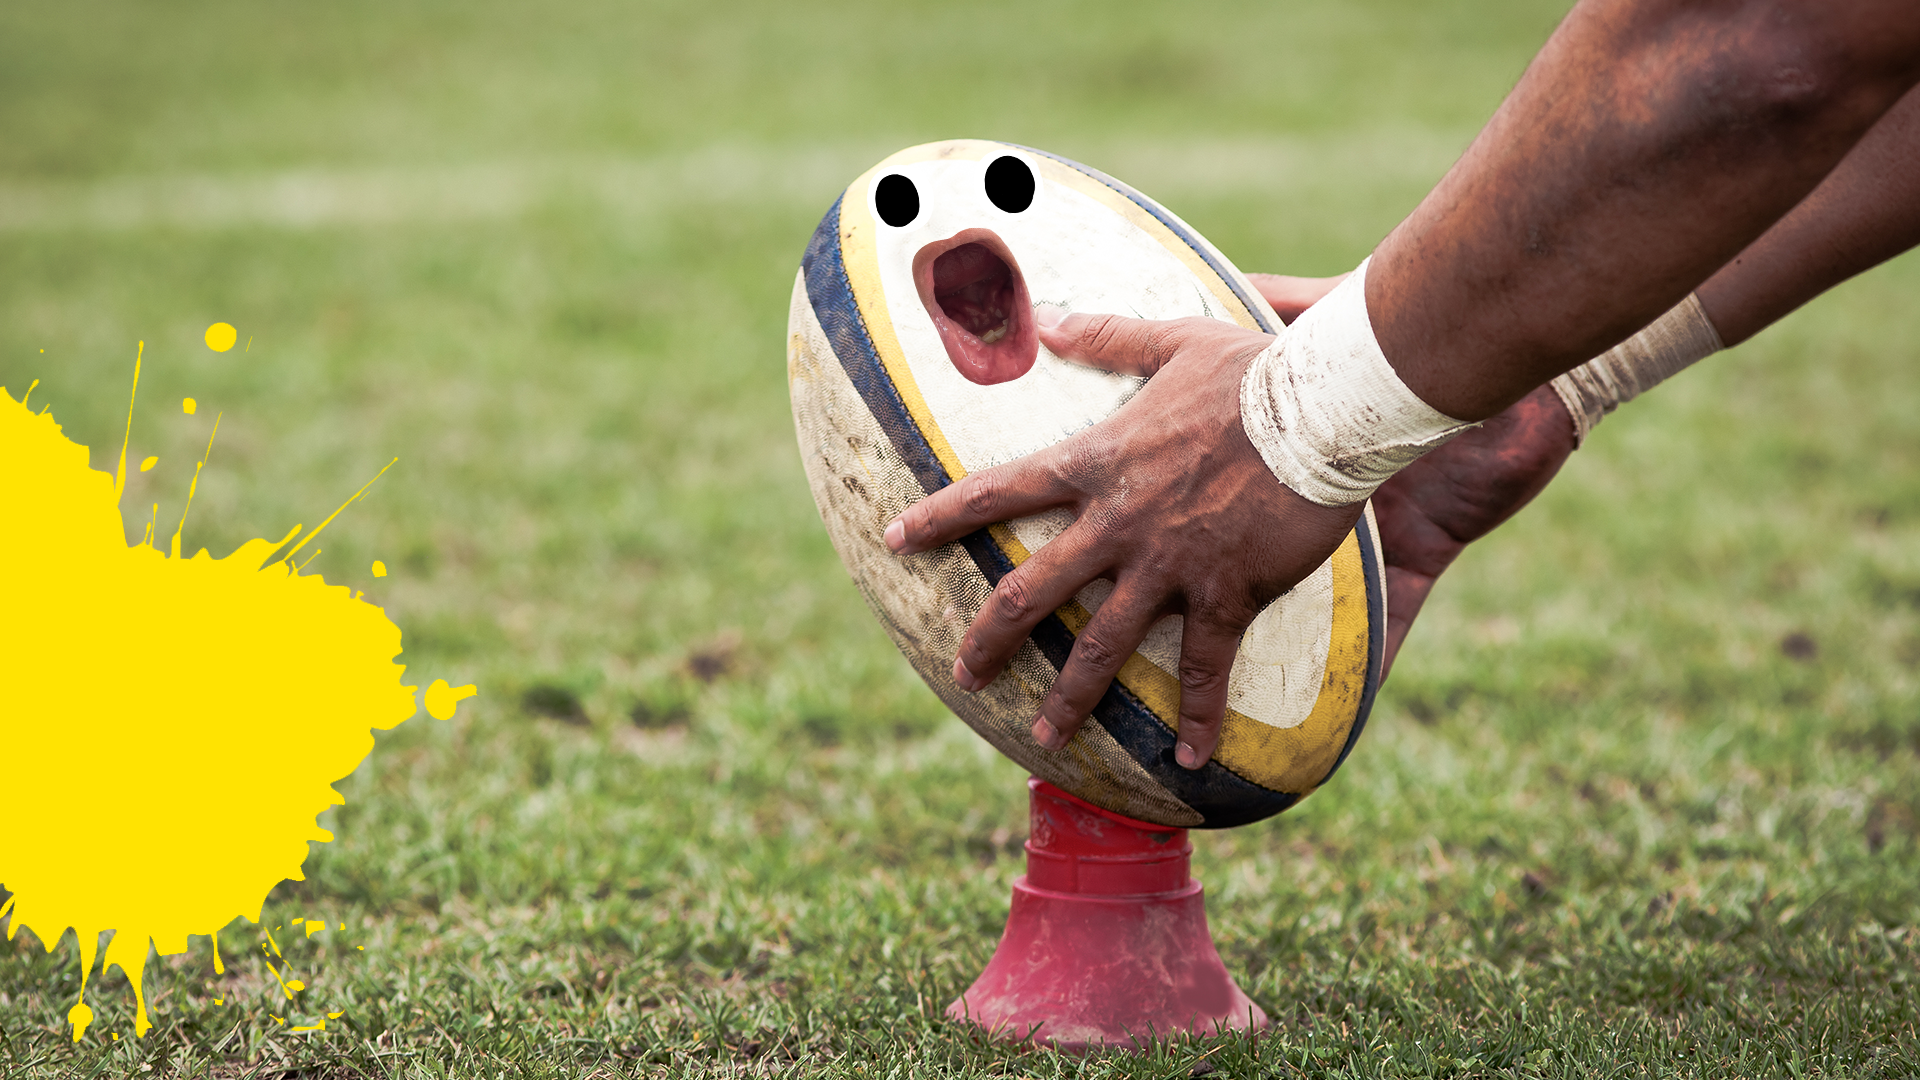 Hands placing rugby ball with face on grass with yellow splat